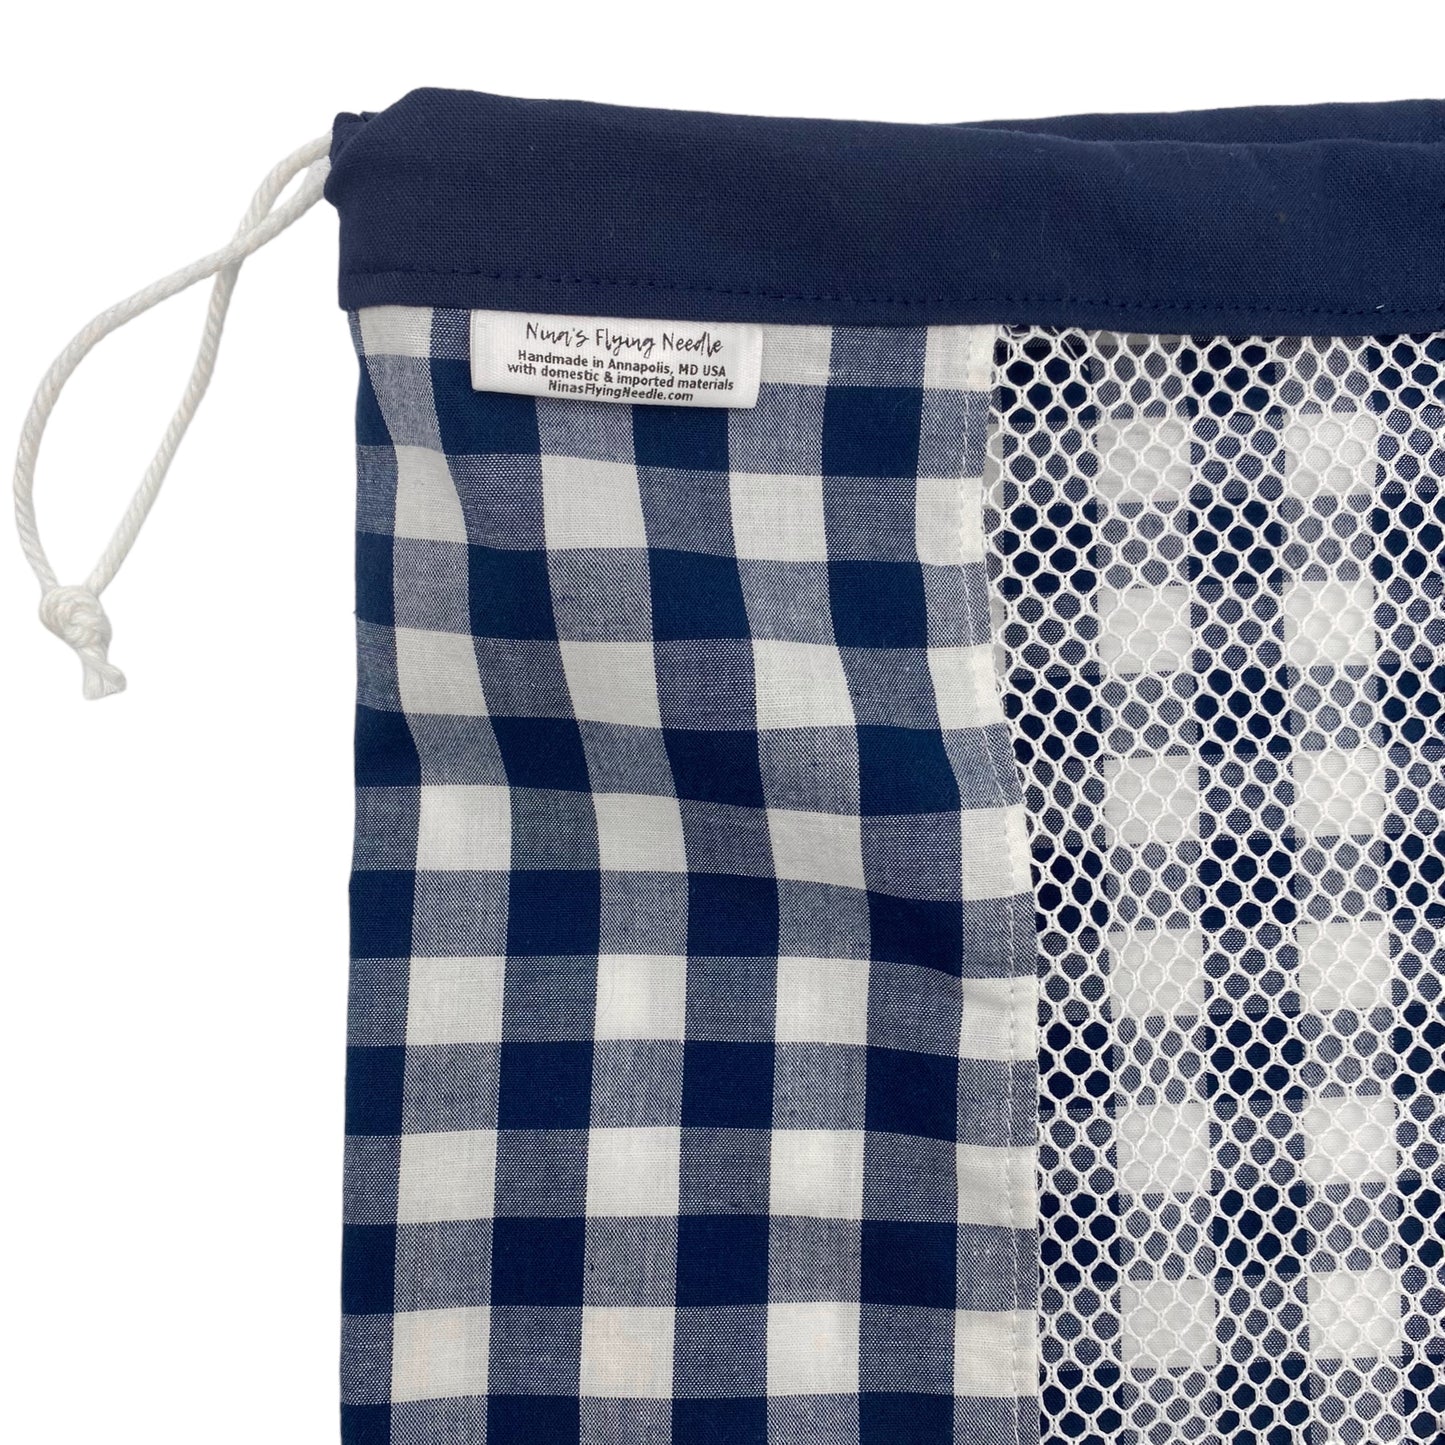 Large Produce Bag Gingham Navy and White